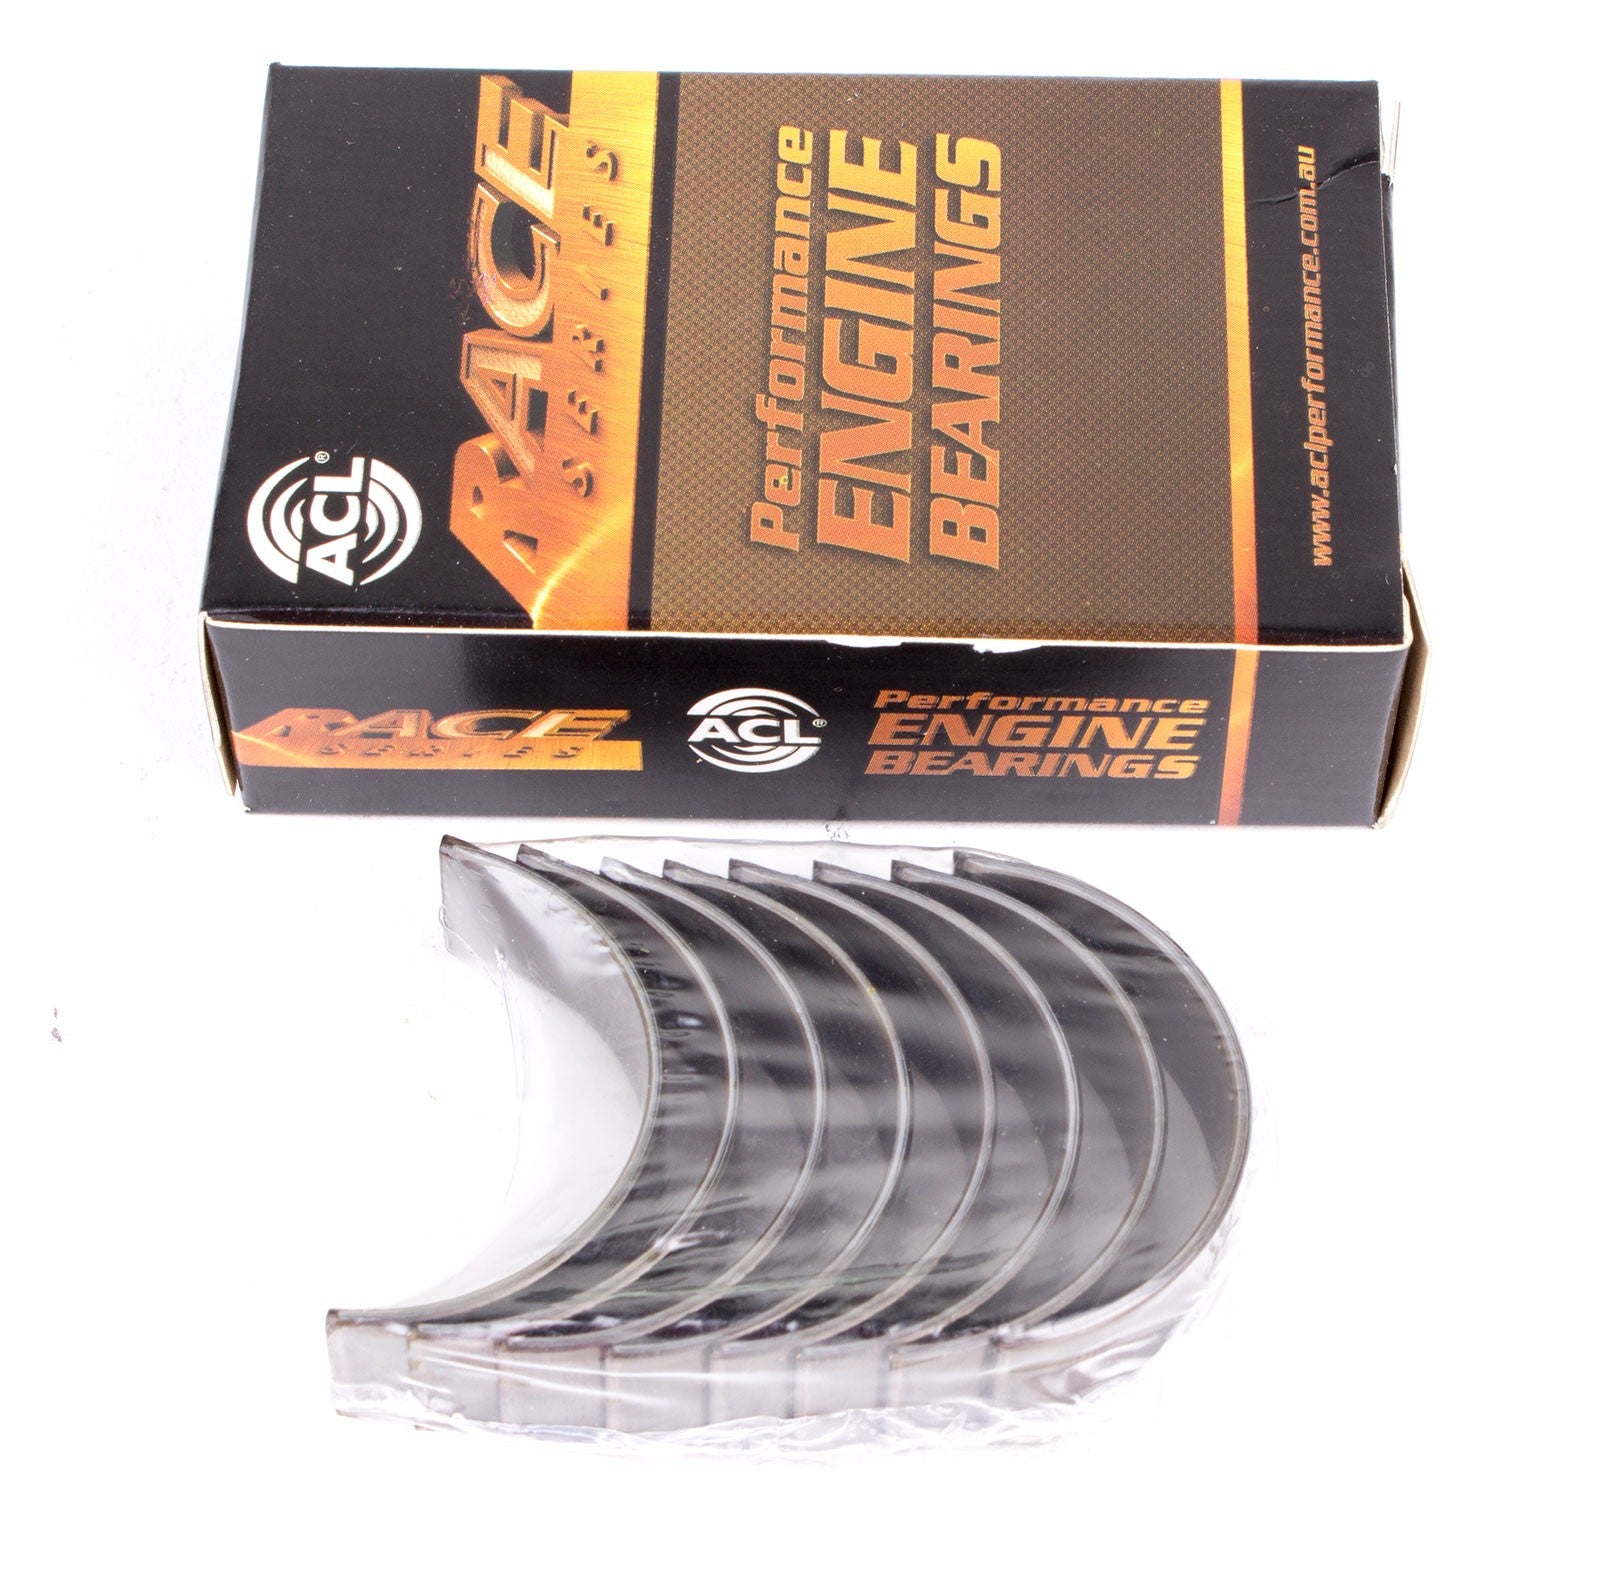 ACL 5M5645H-.25 Main bearing set (ACL Race Series) Photo-0 